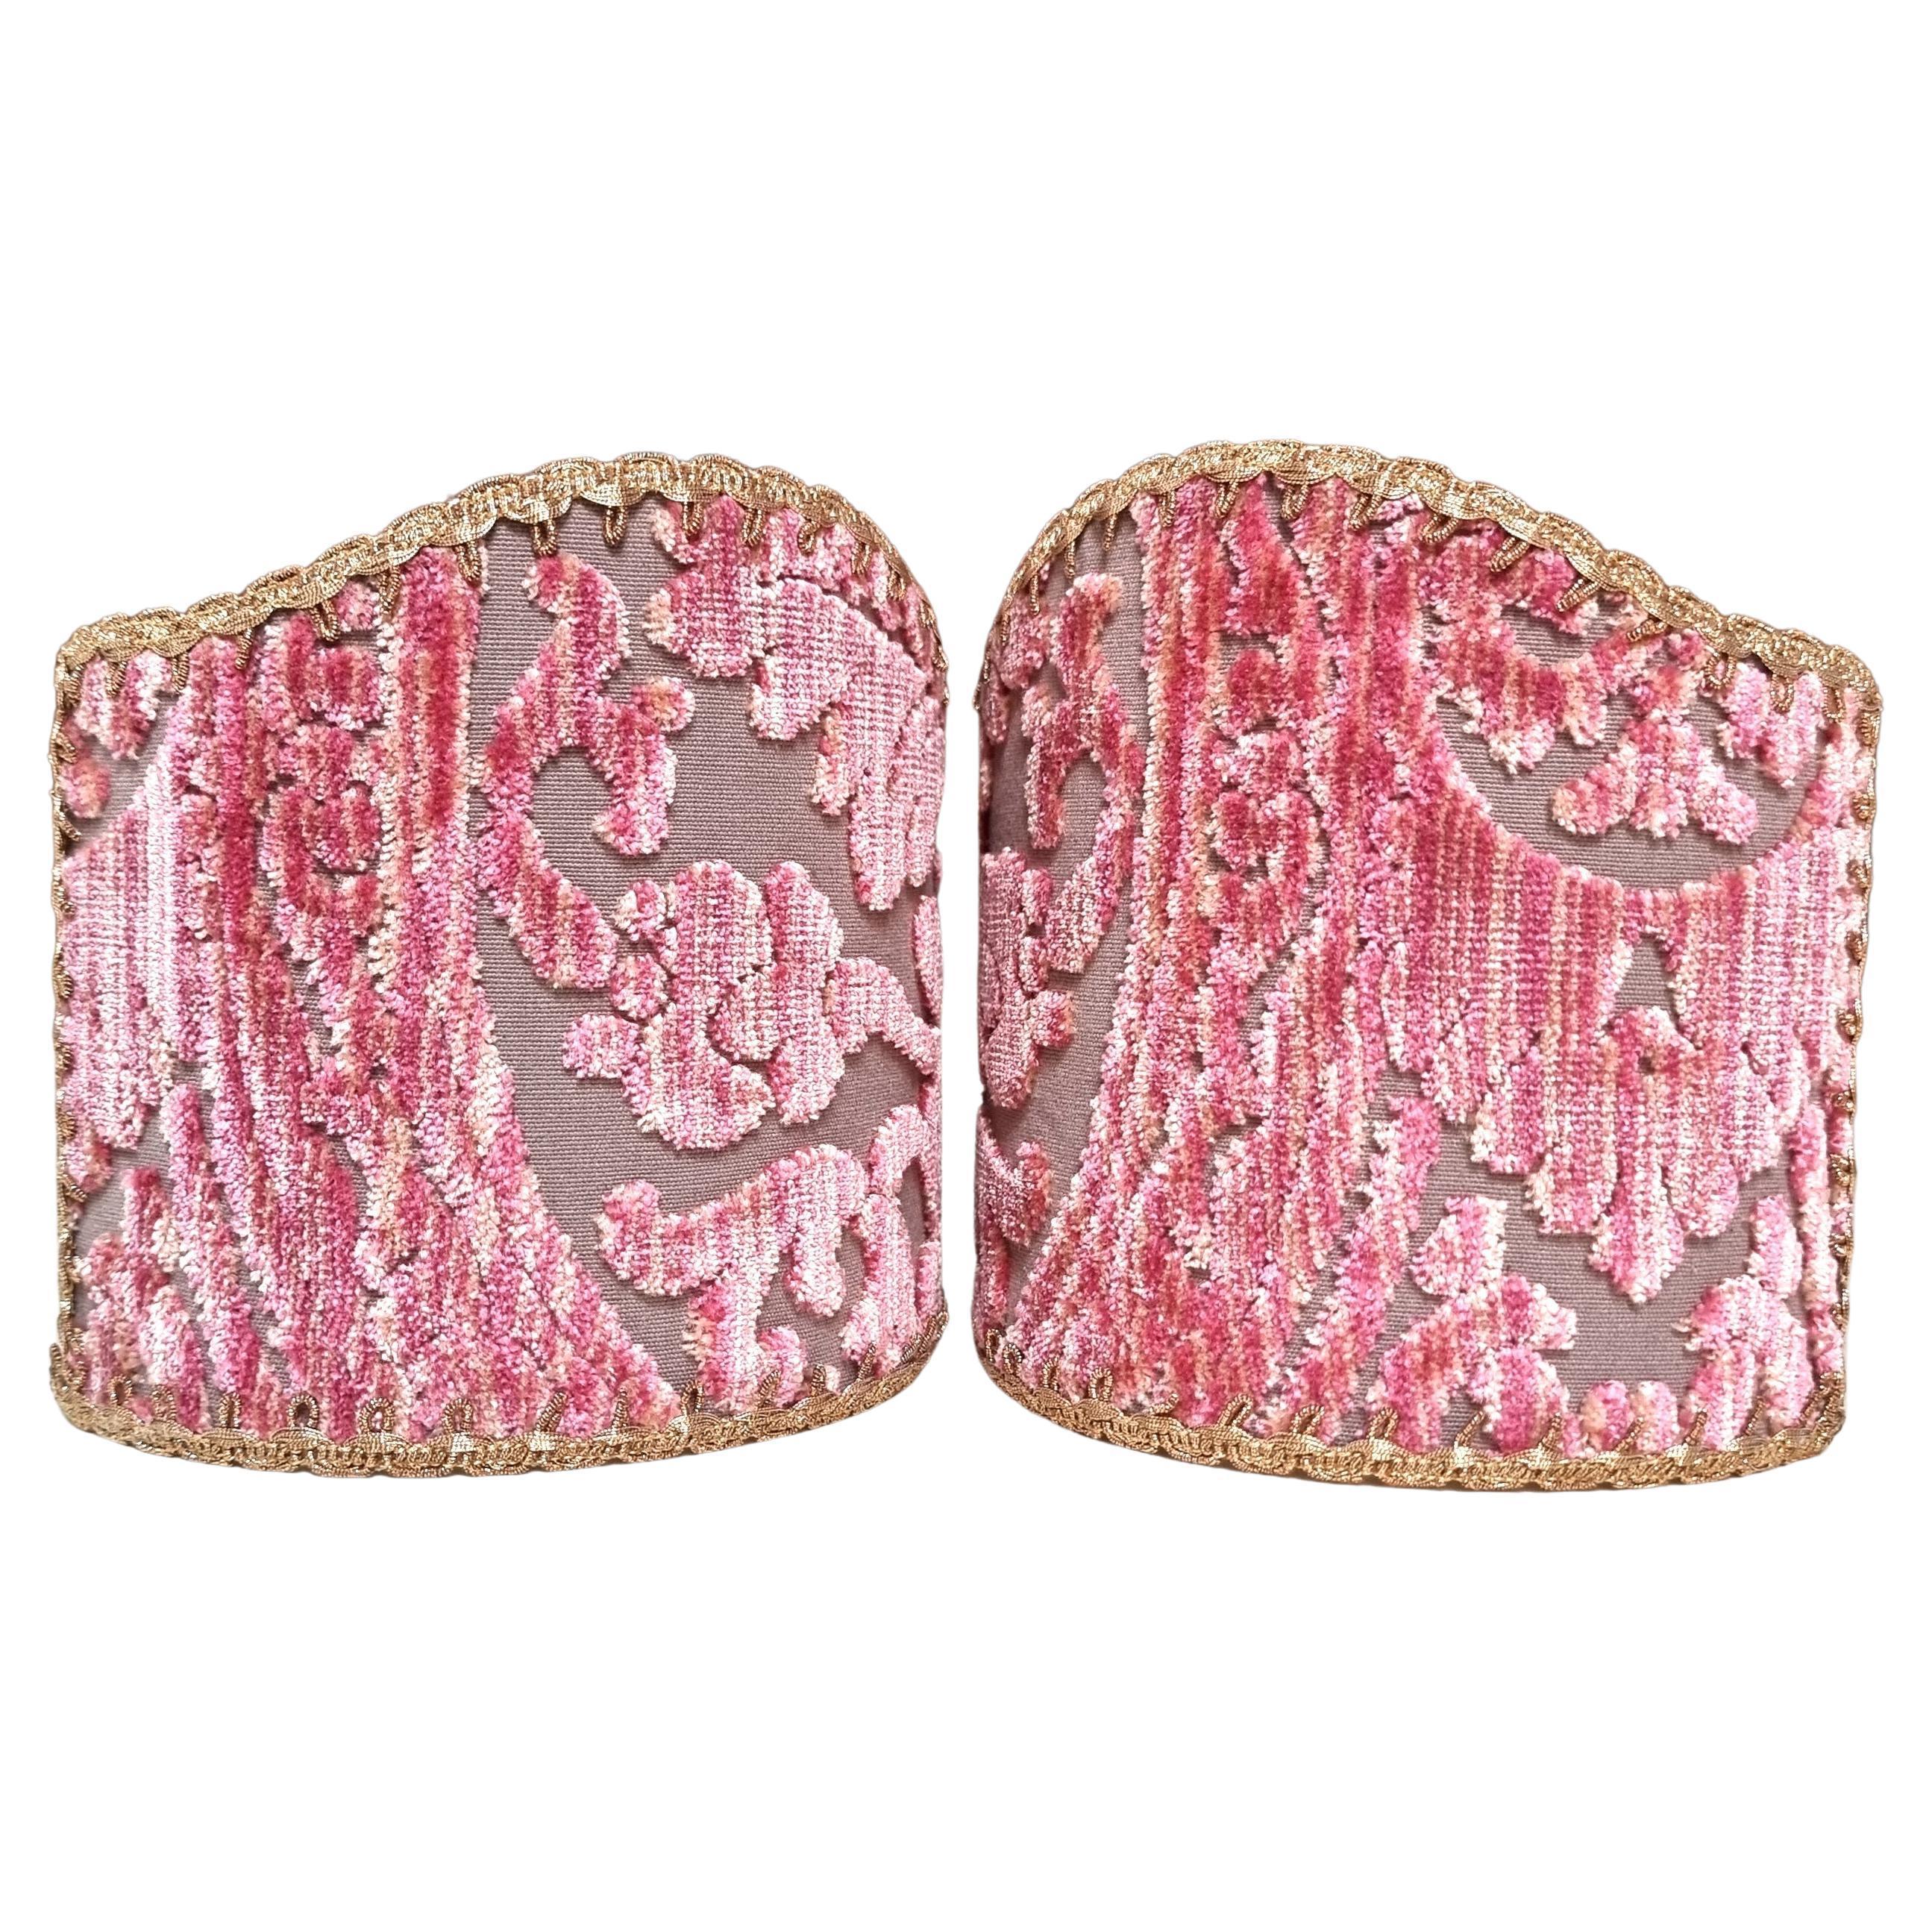 This pretty set of 2 clip on wall sconce lampshades with a fitting that clips over the light bulb is handmade using Luigi Bevilacqua velvet - Da Vinci pattern - in antique pink color, finished with gold trim. Suitable for candelabra bulbs only.